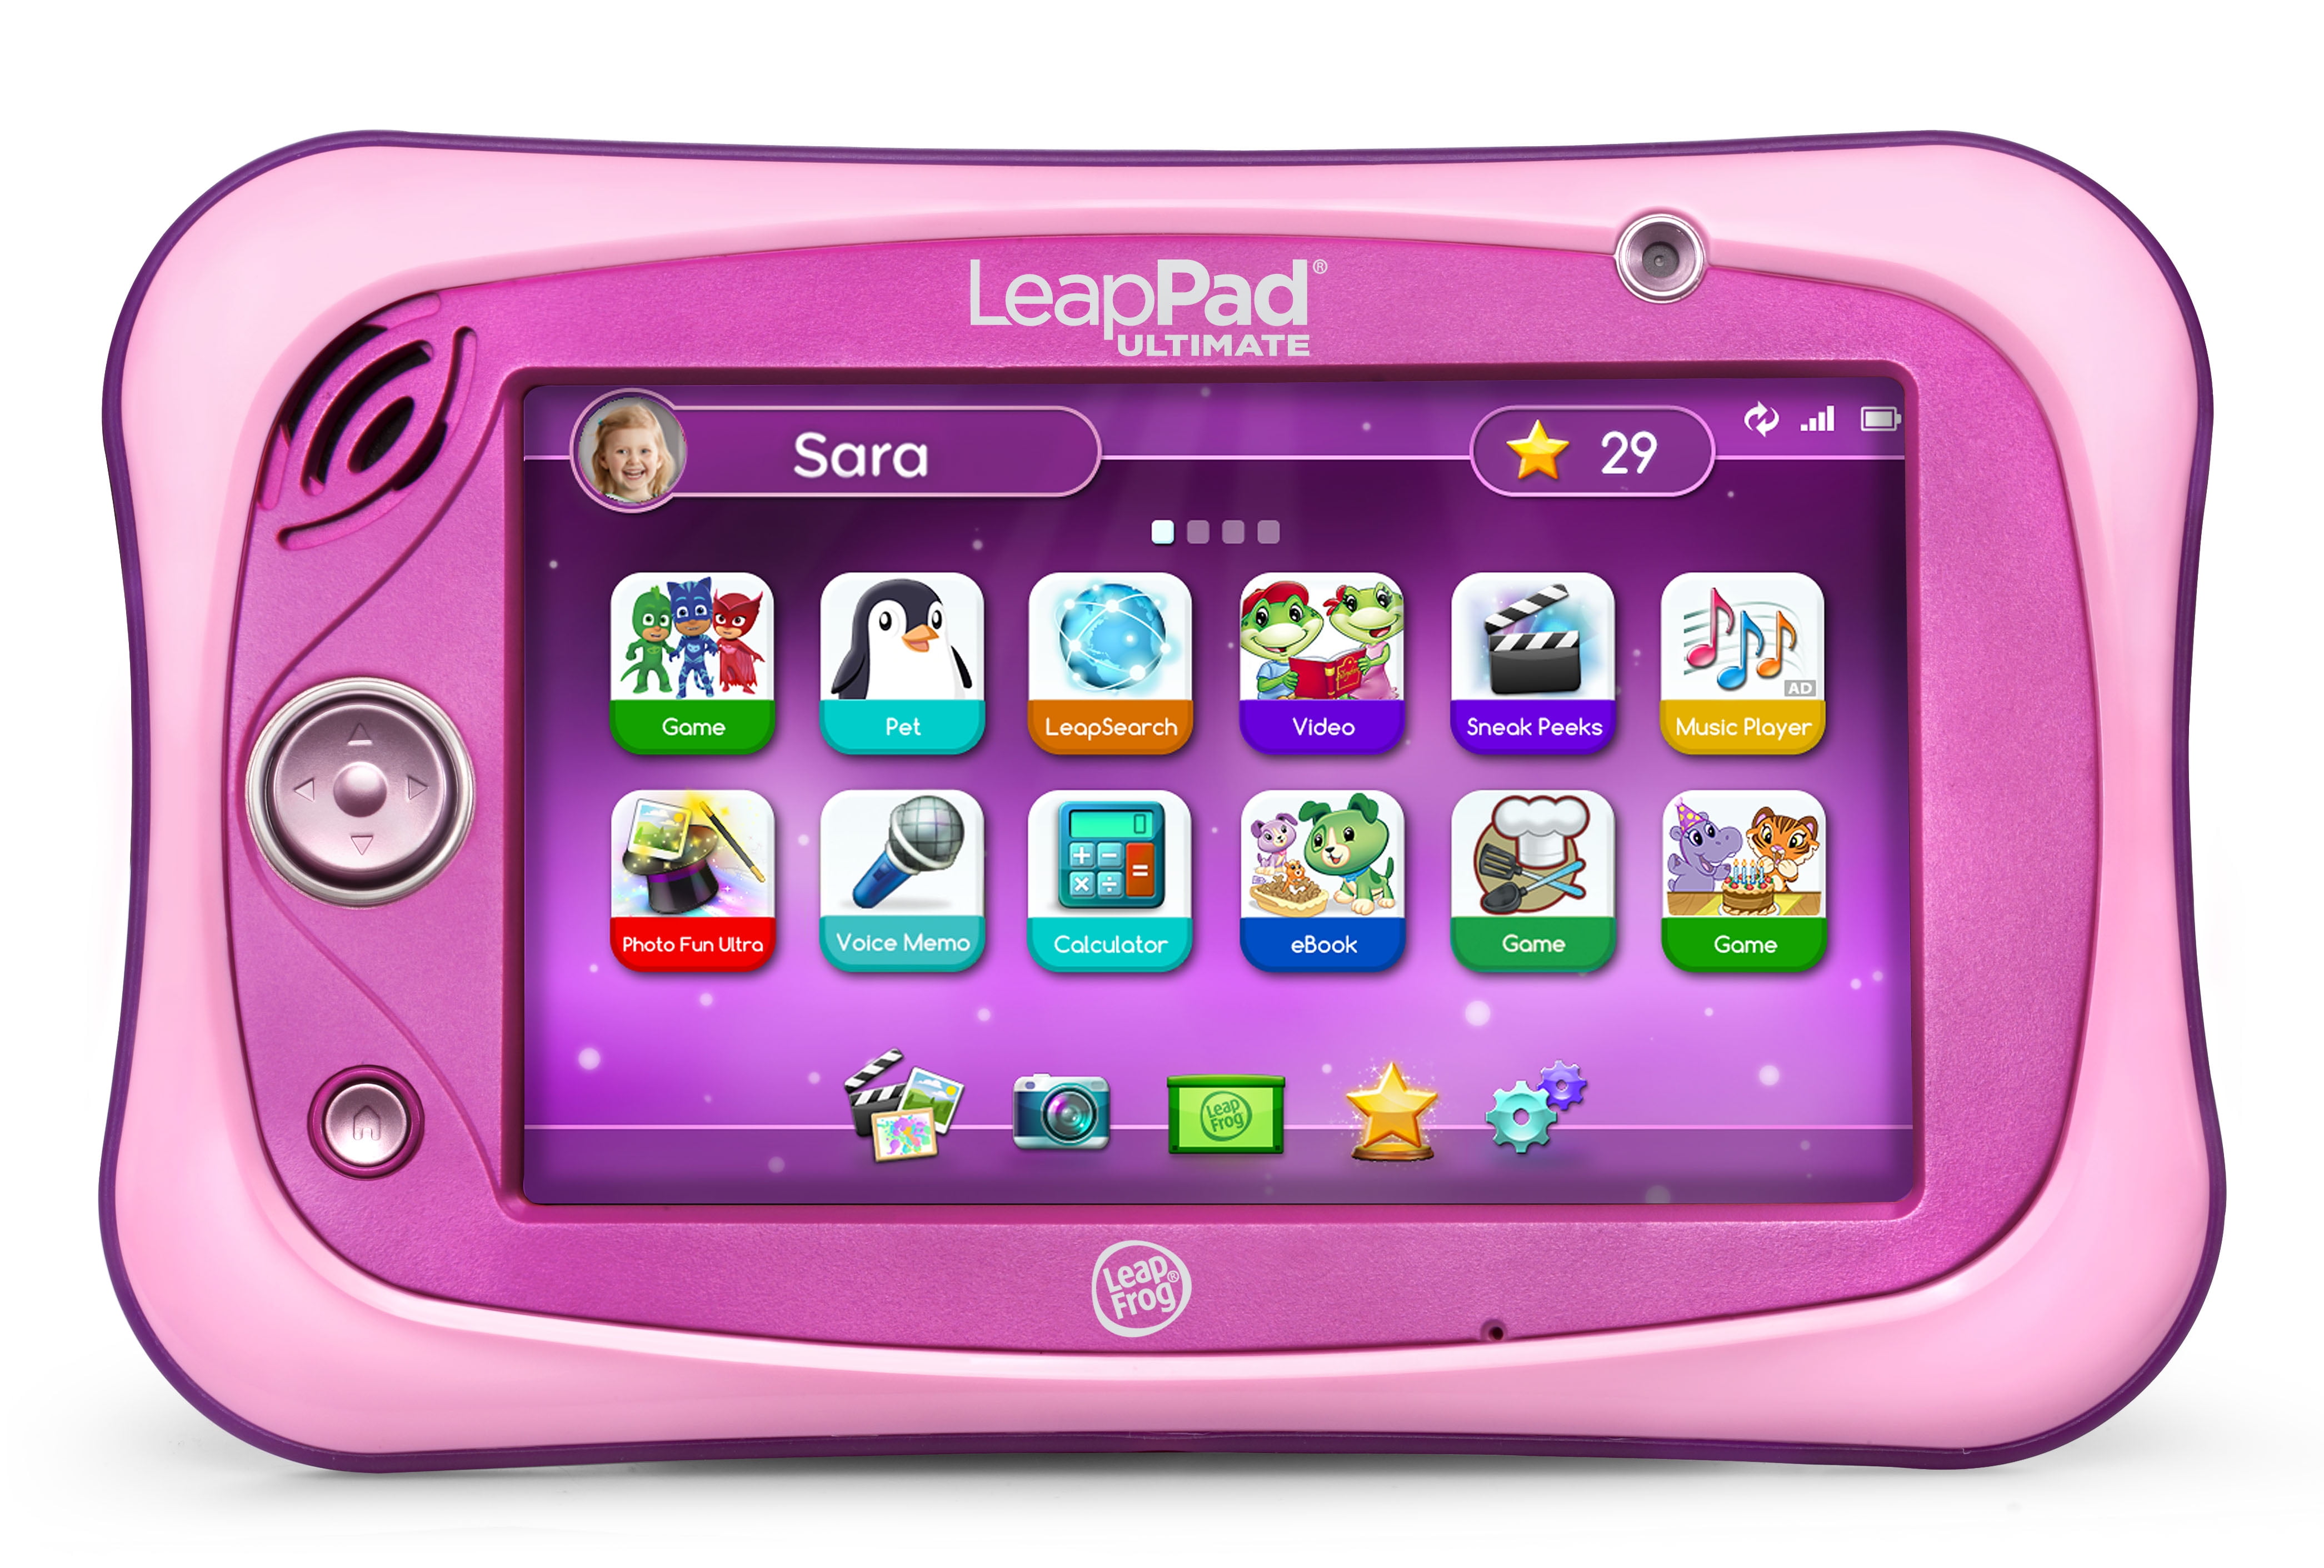 Leapfrog Leappad2 Crayola Creativity Pack Bundle with LeapPad2 Pink Tablet NEW 